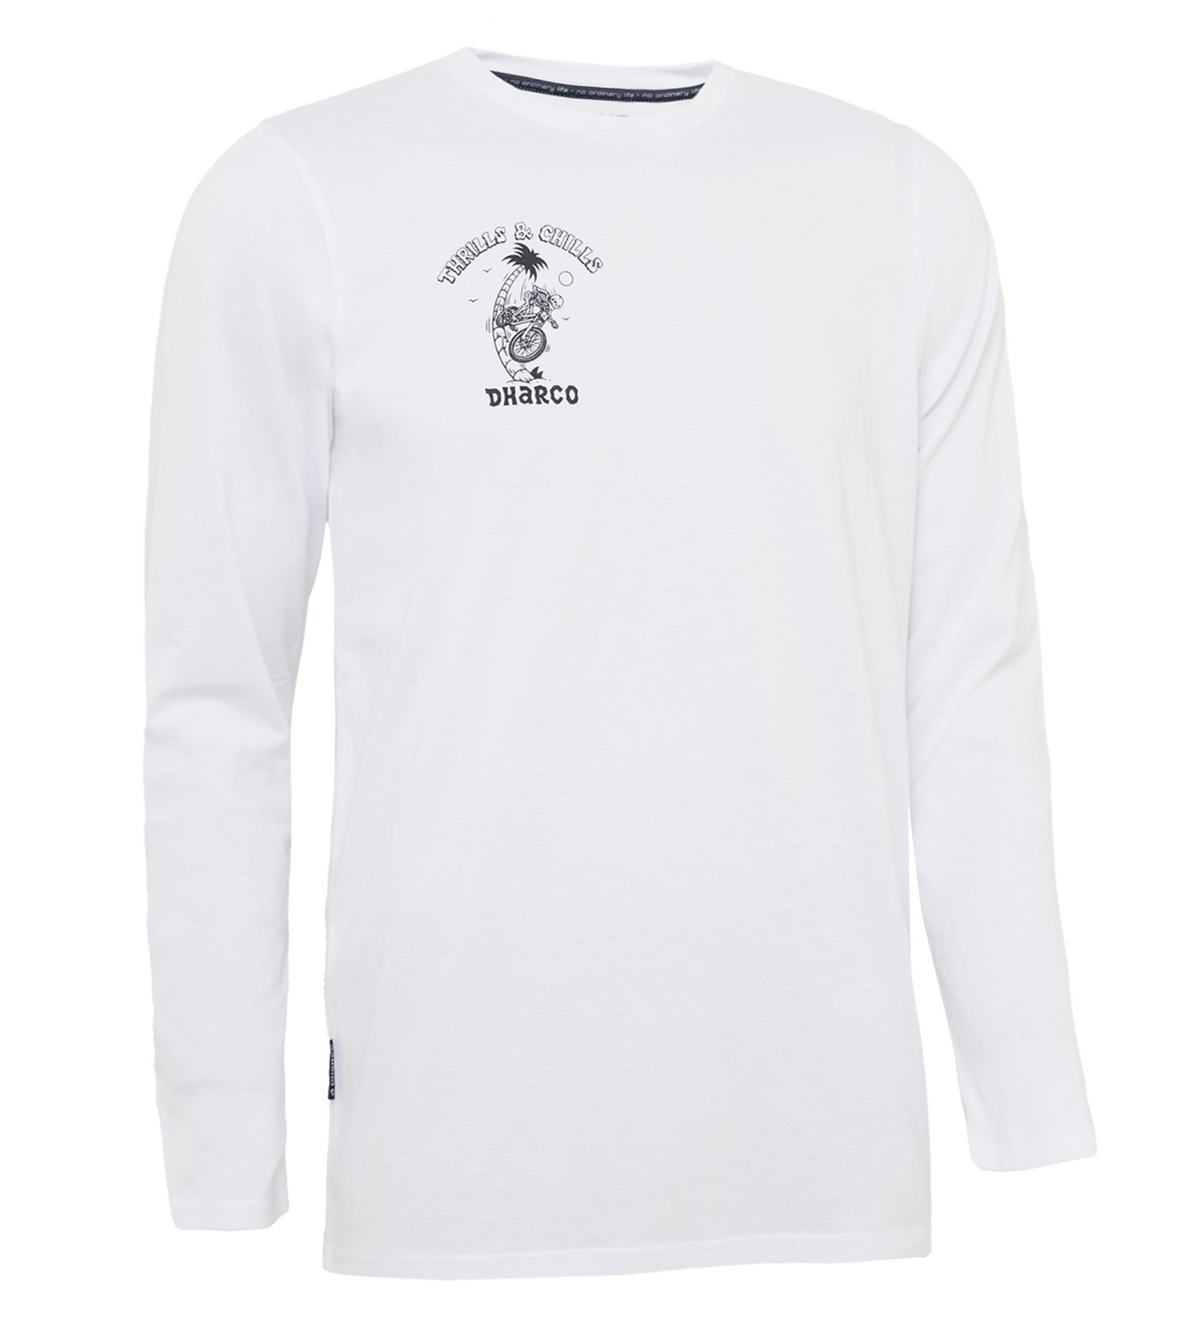 DHarco Mens Tech Long Sleeve Tee | Thrills & Chills